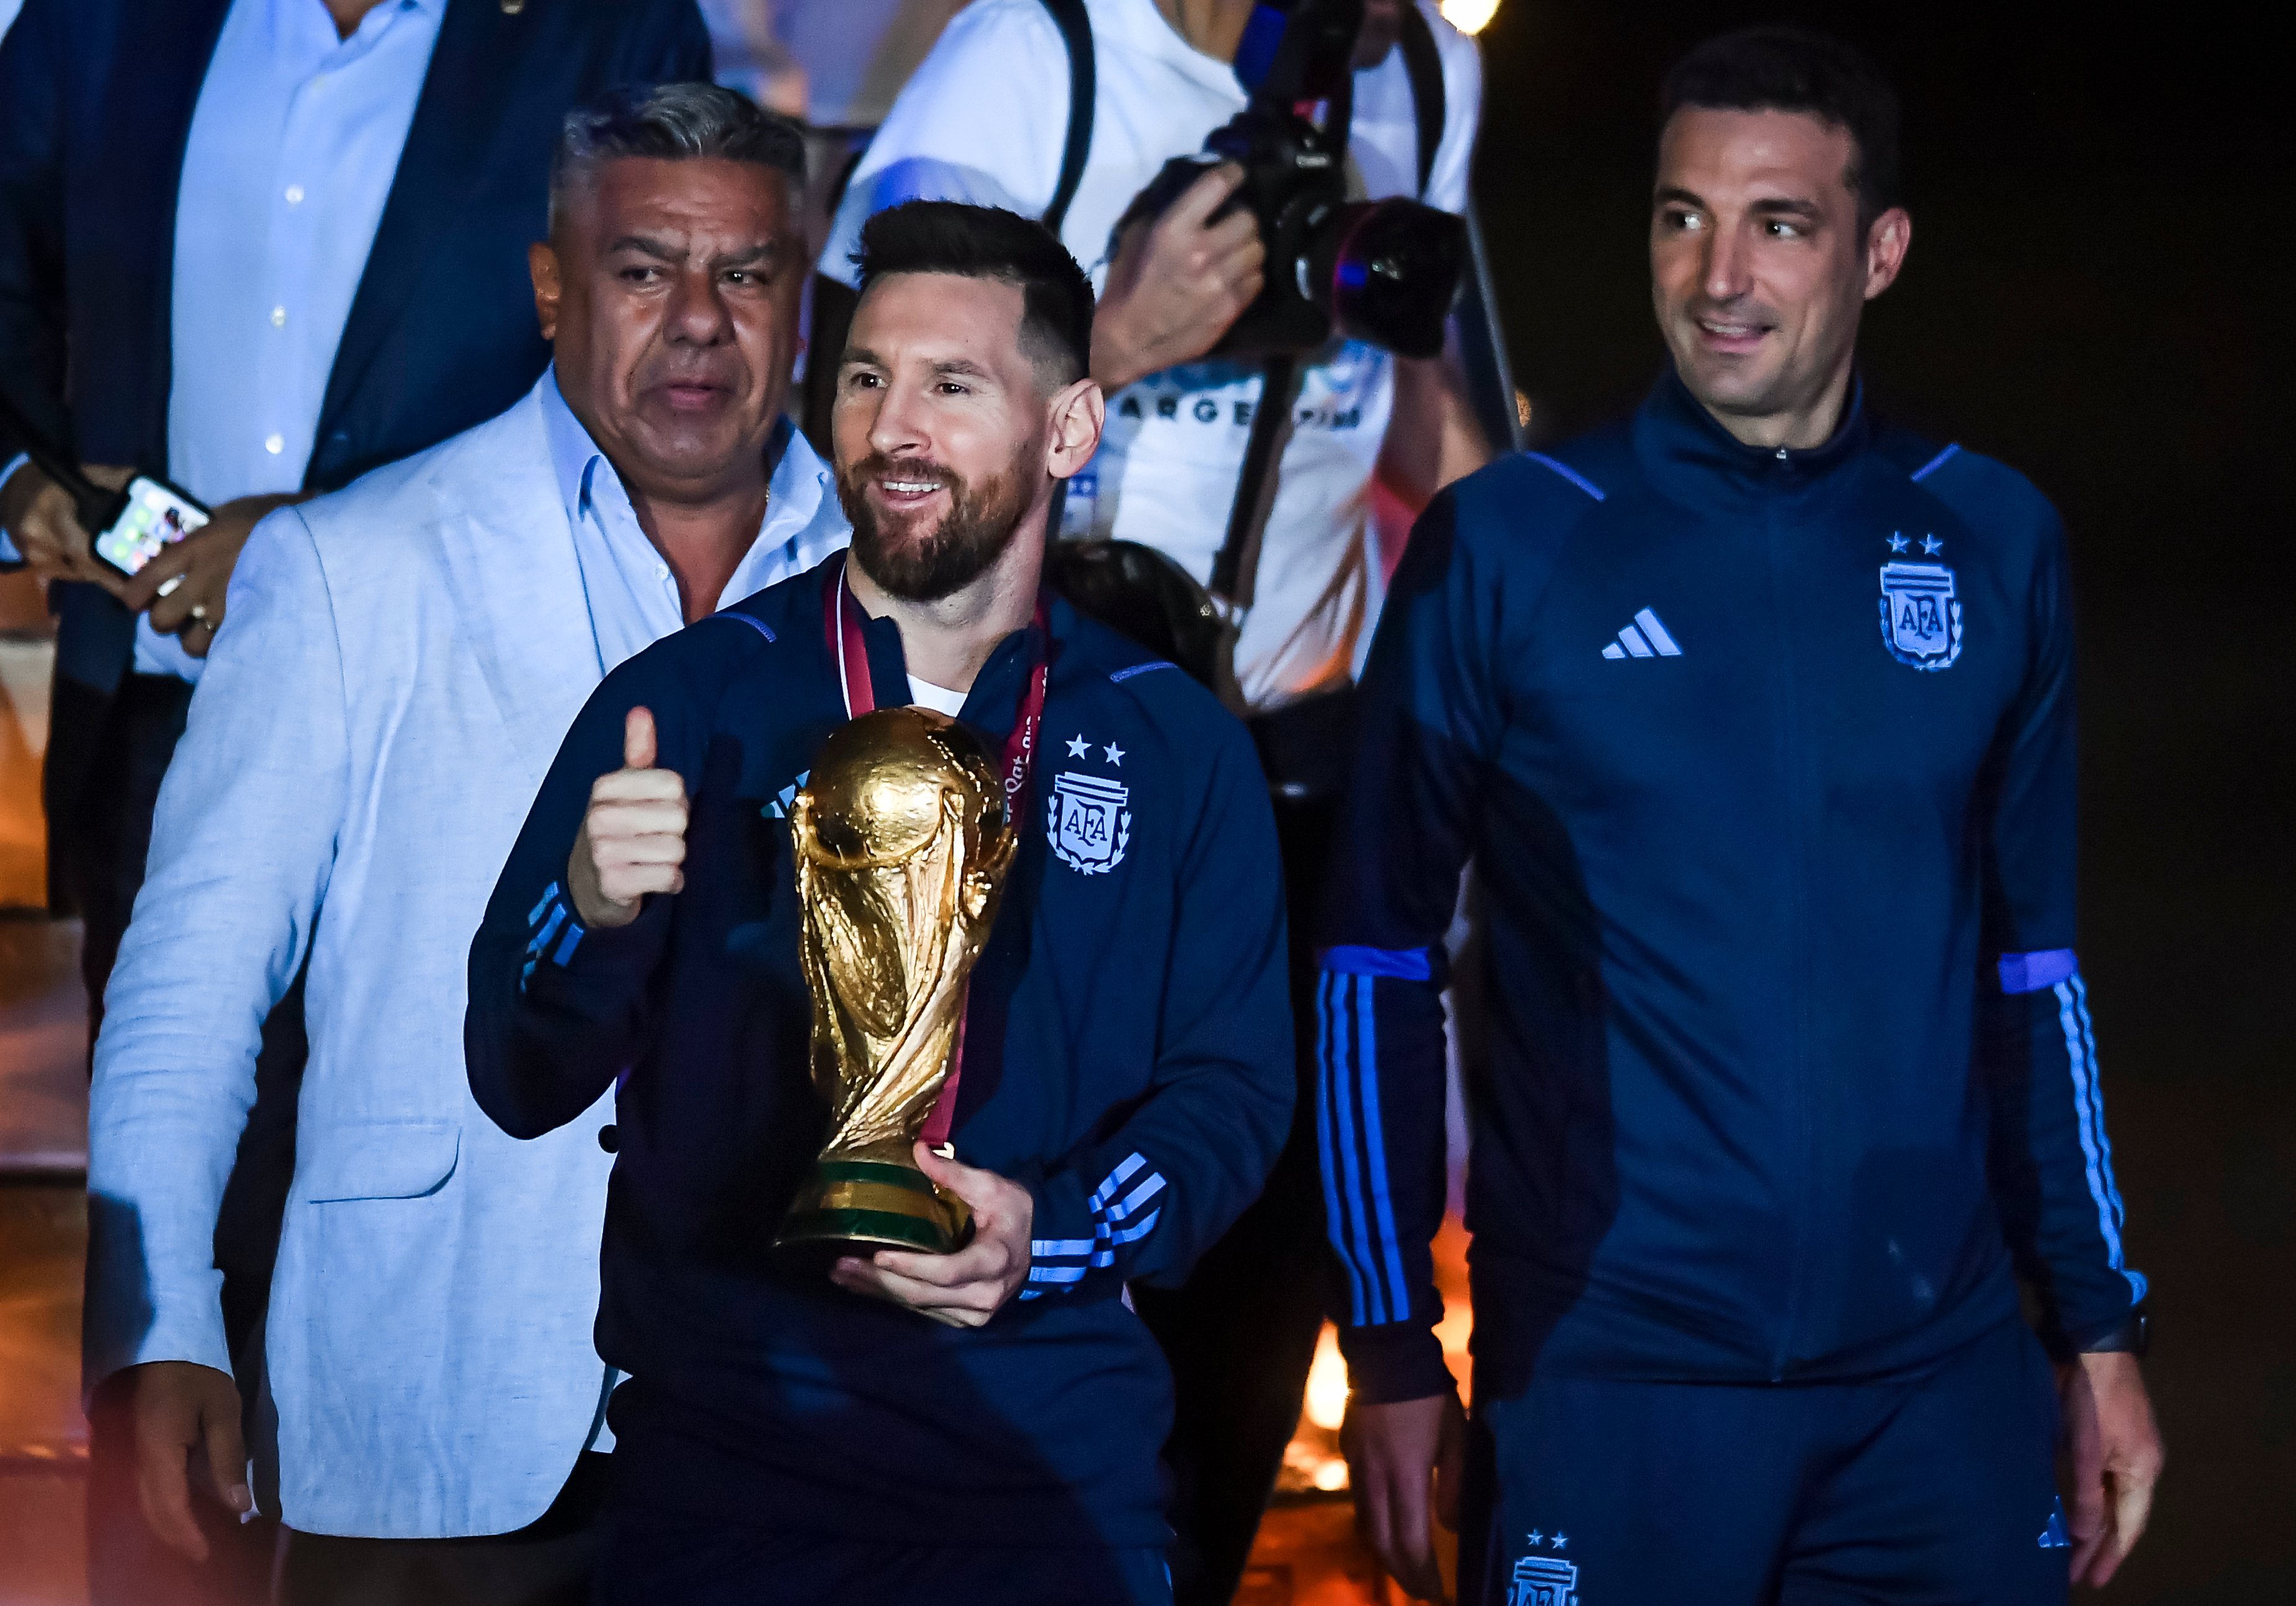 FIFA World Cup Qatar 2022 Winners Arrive to Buenos Aires